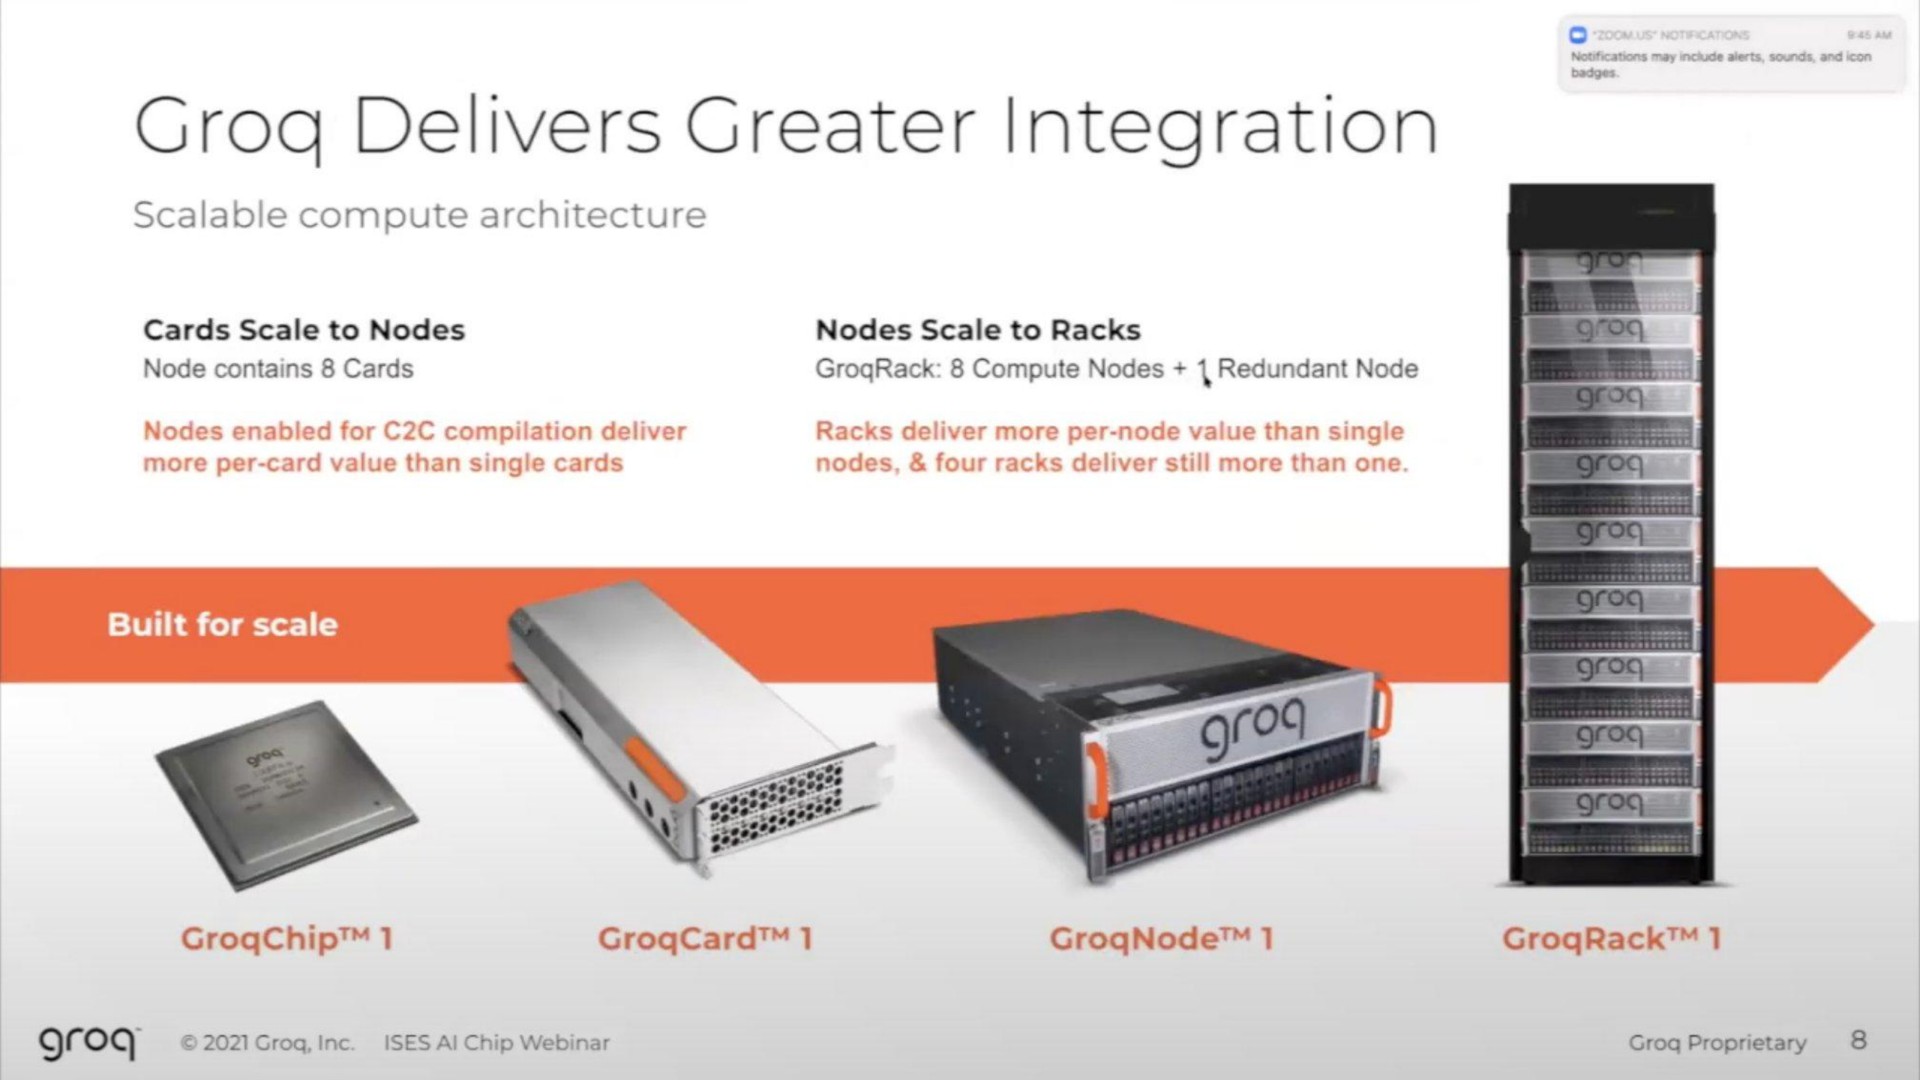 grog delivers greater integration scalable compute architecture cards scale to nodes nodes scale to racks built for scale | Groq